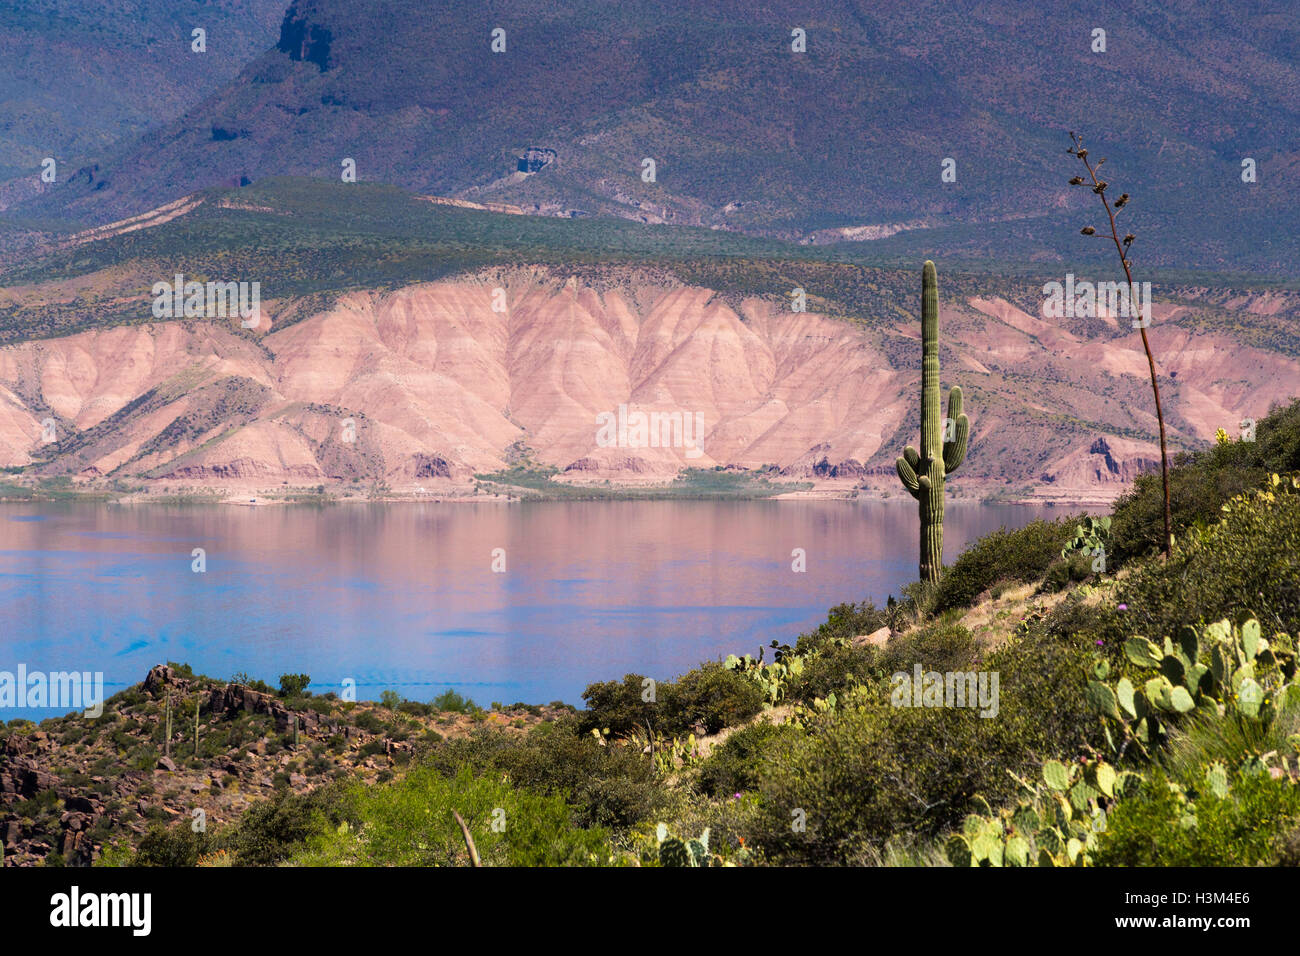 Badland hills flooded by the damming of Roosevelt Lake at the base of the Sierra Ancha Mountains. Tonto National Forest, Arizona Stock Photo